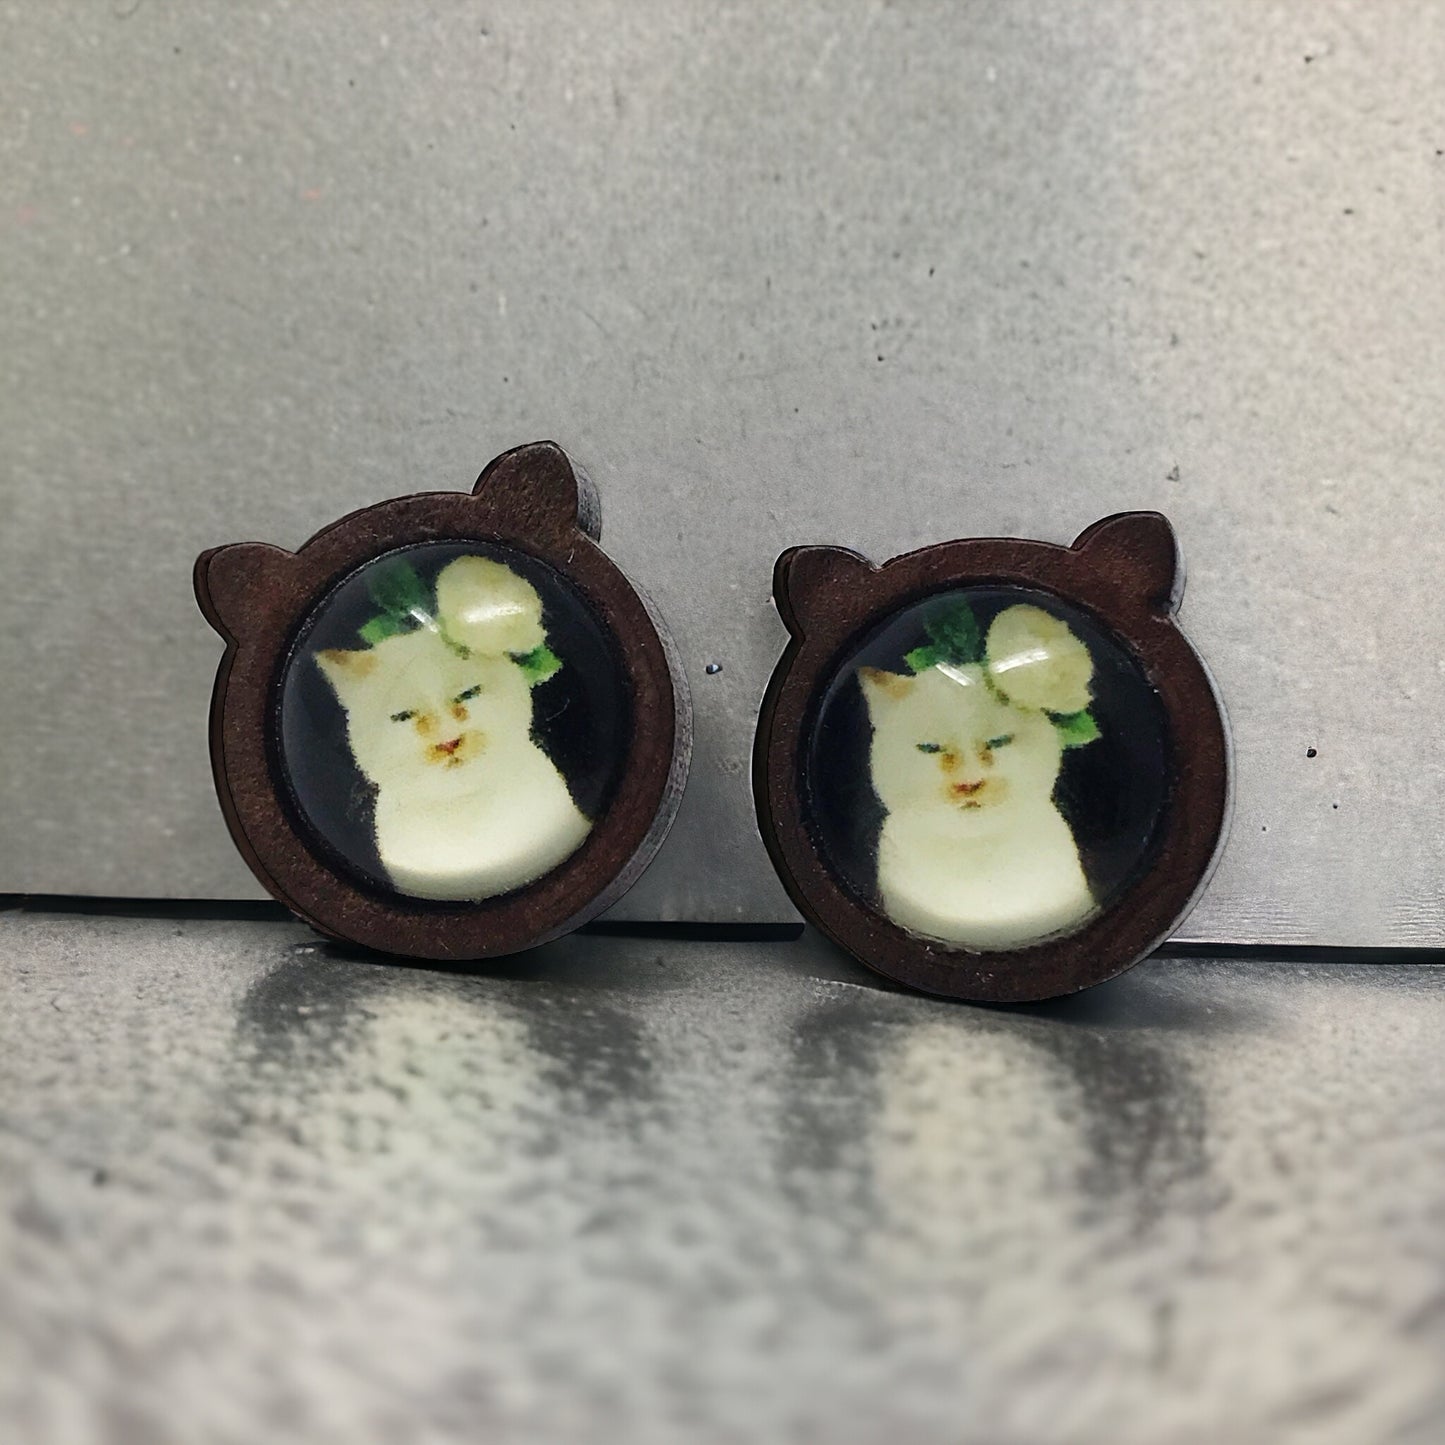 Whimsical Cat & Flower Earrings - Handmade Wooden Cat Shaped Jewelry for Stylish Cat Enthusiasts